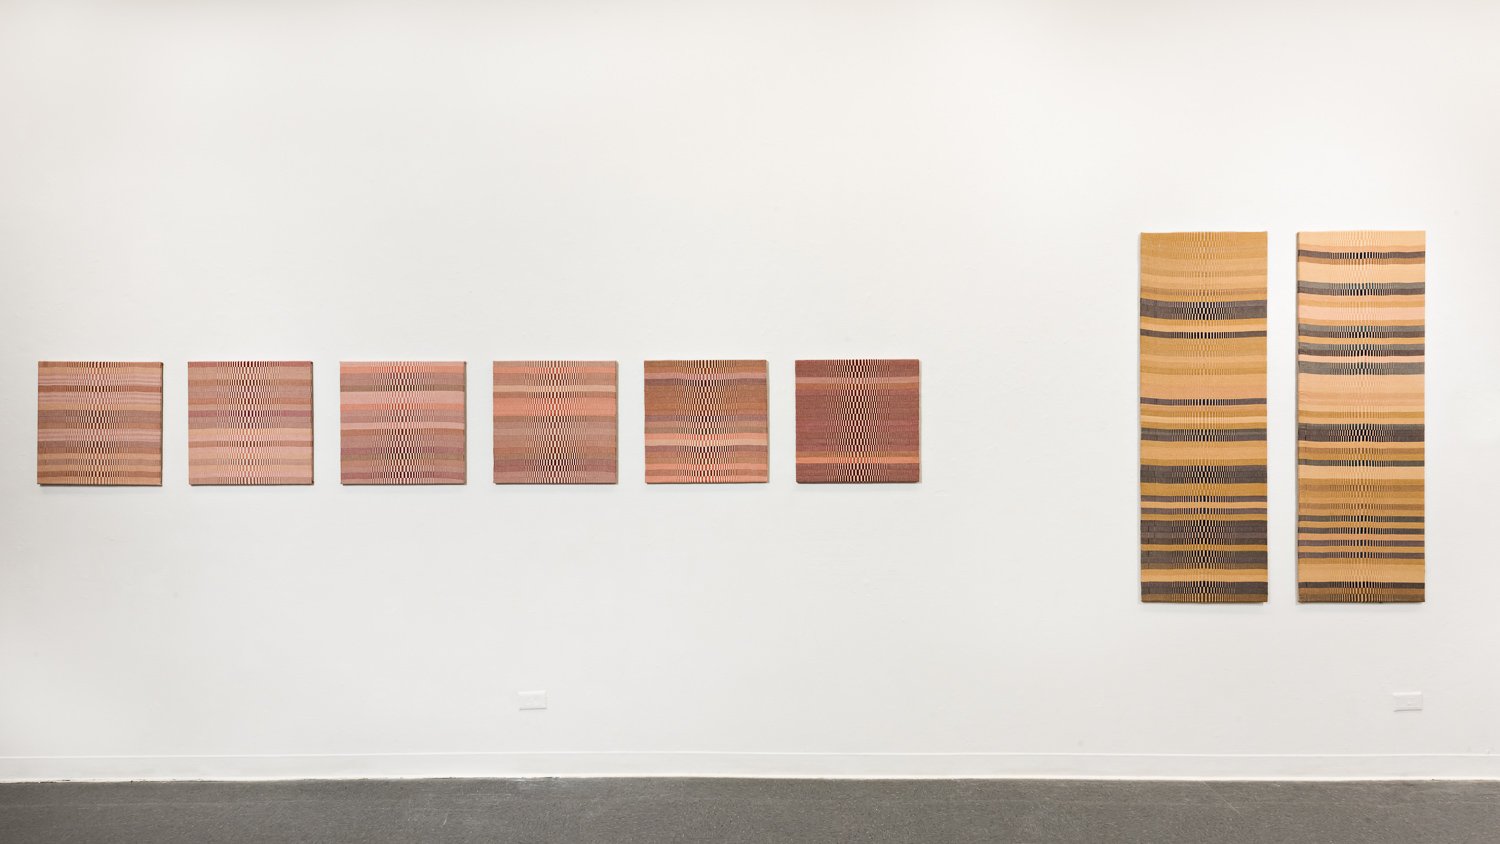  “(processing) Bay Area Artists and the Archive,” curated by Farley Gwazda, 2015 